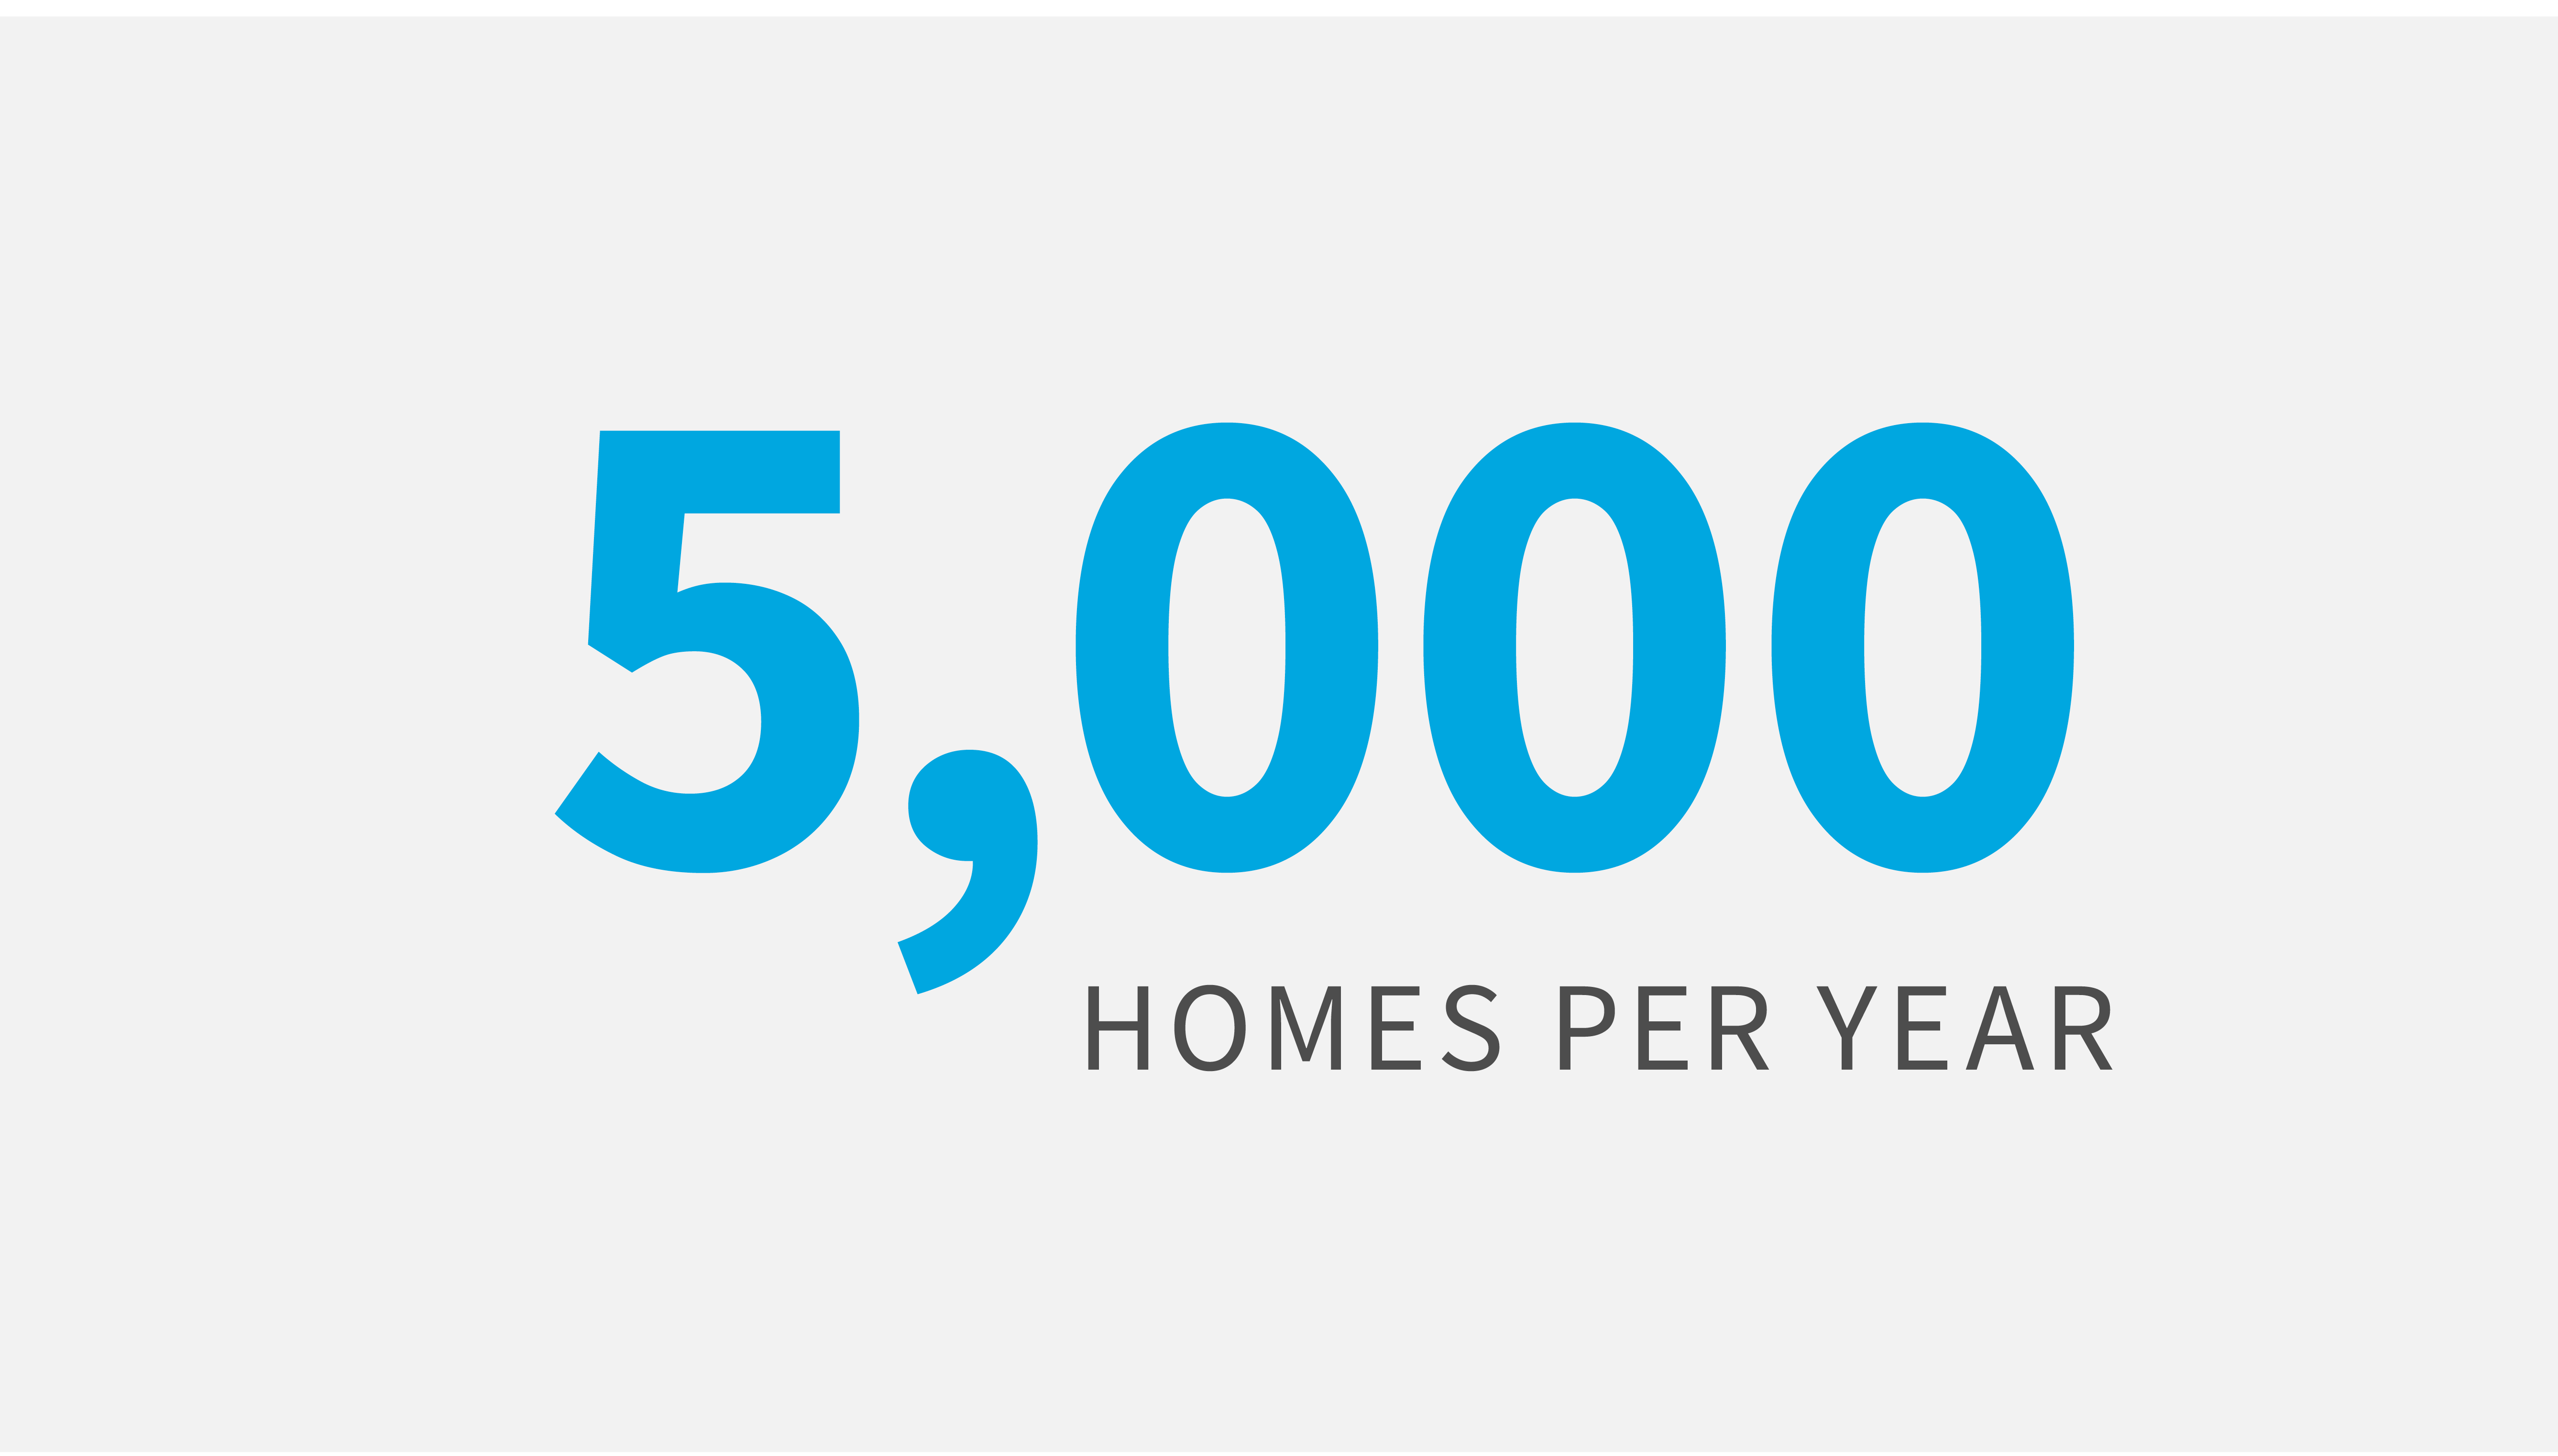 CBG builds 5,000 homes per year.